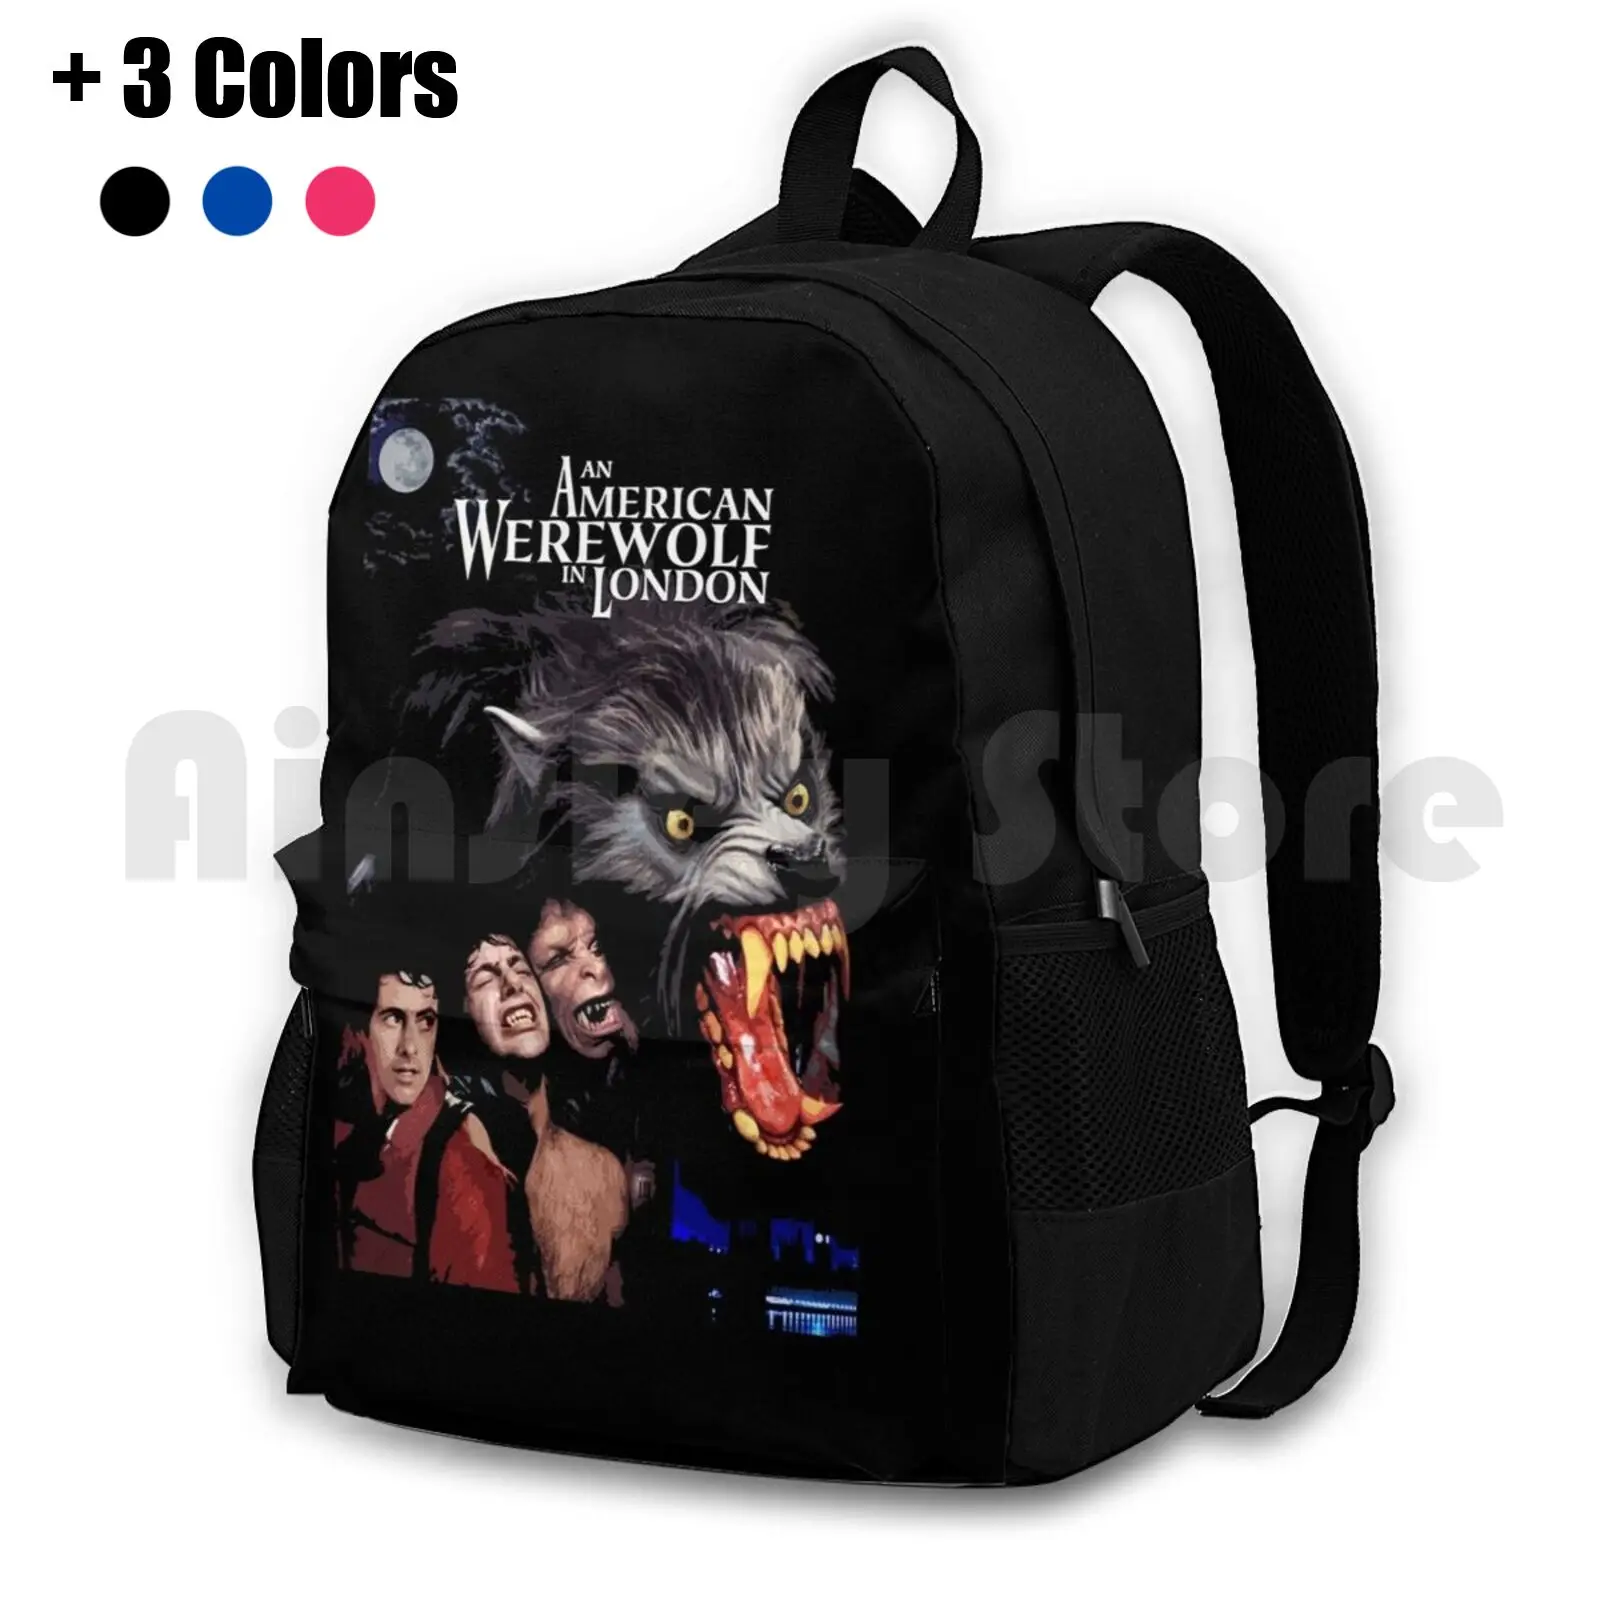 

An American Werewolf In London Outdoor Hiking Backpack Riding Climbing Sports Bag Werewolf 80S 80S Movies Horror Terror Movies